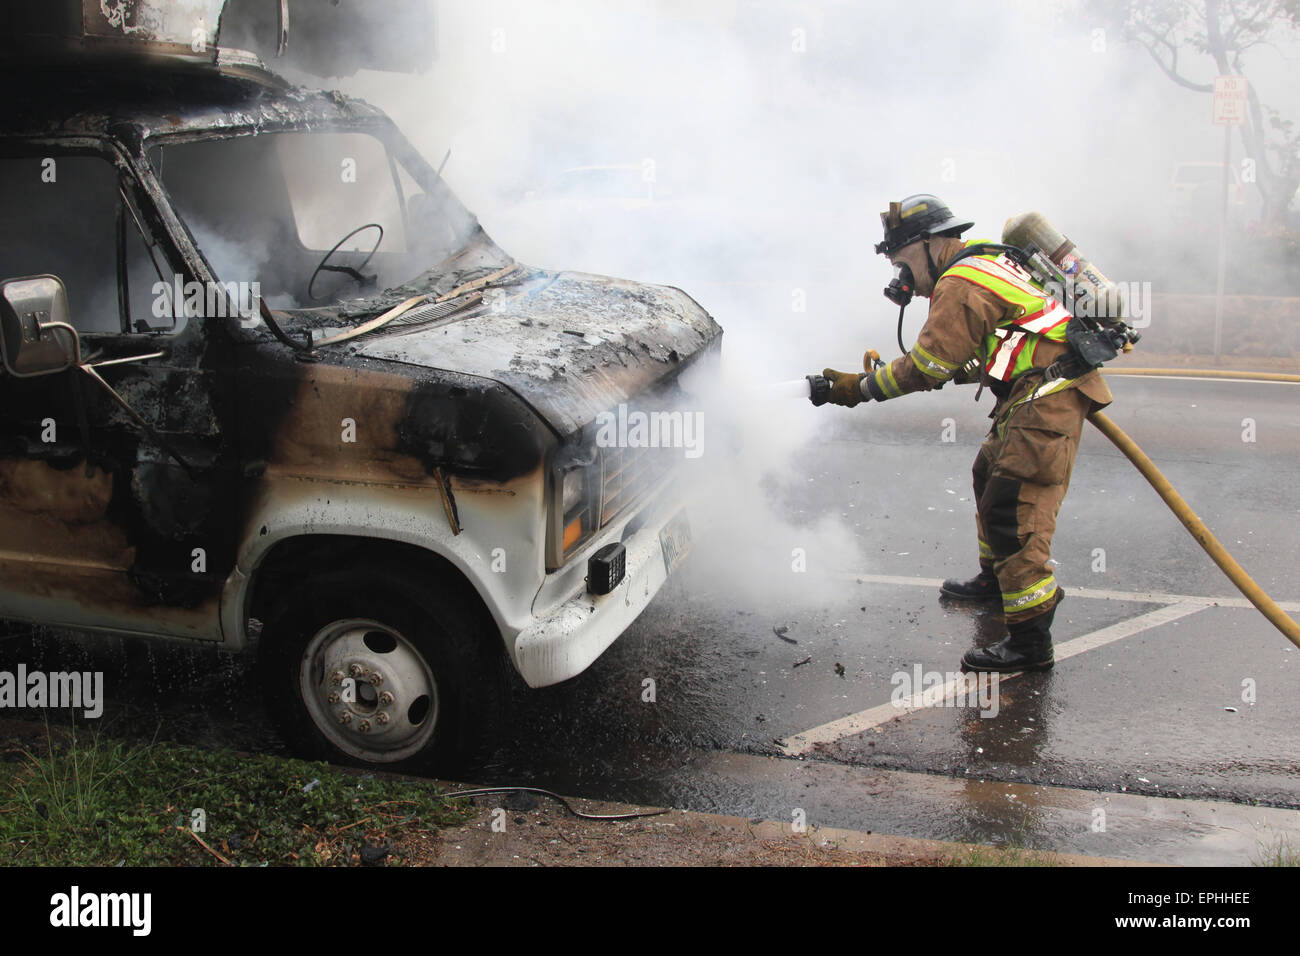 Unknown fireman spraying water on a vehicle fire Stock Photo